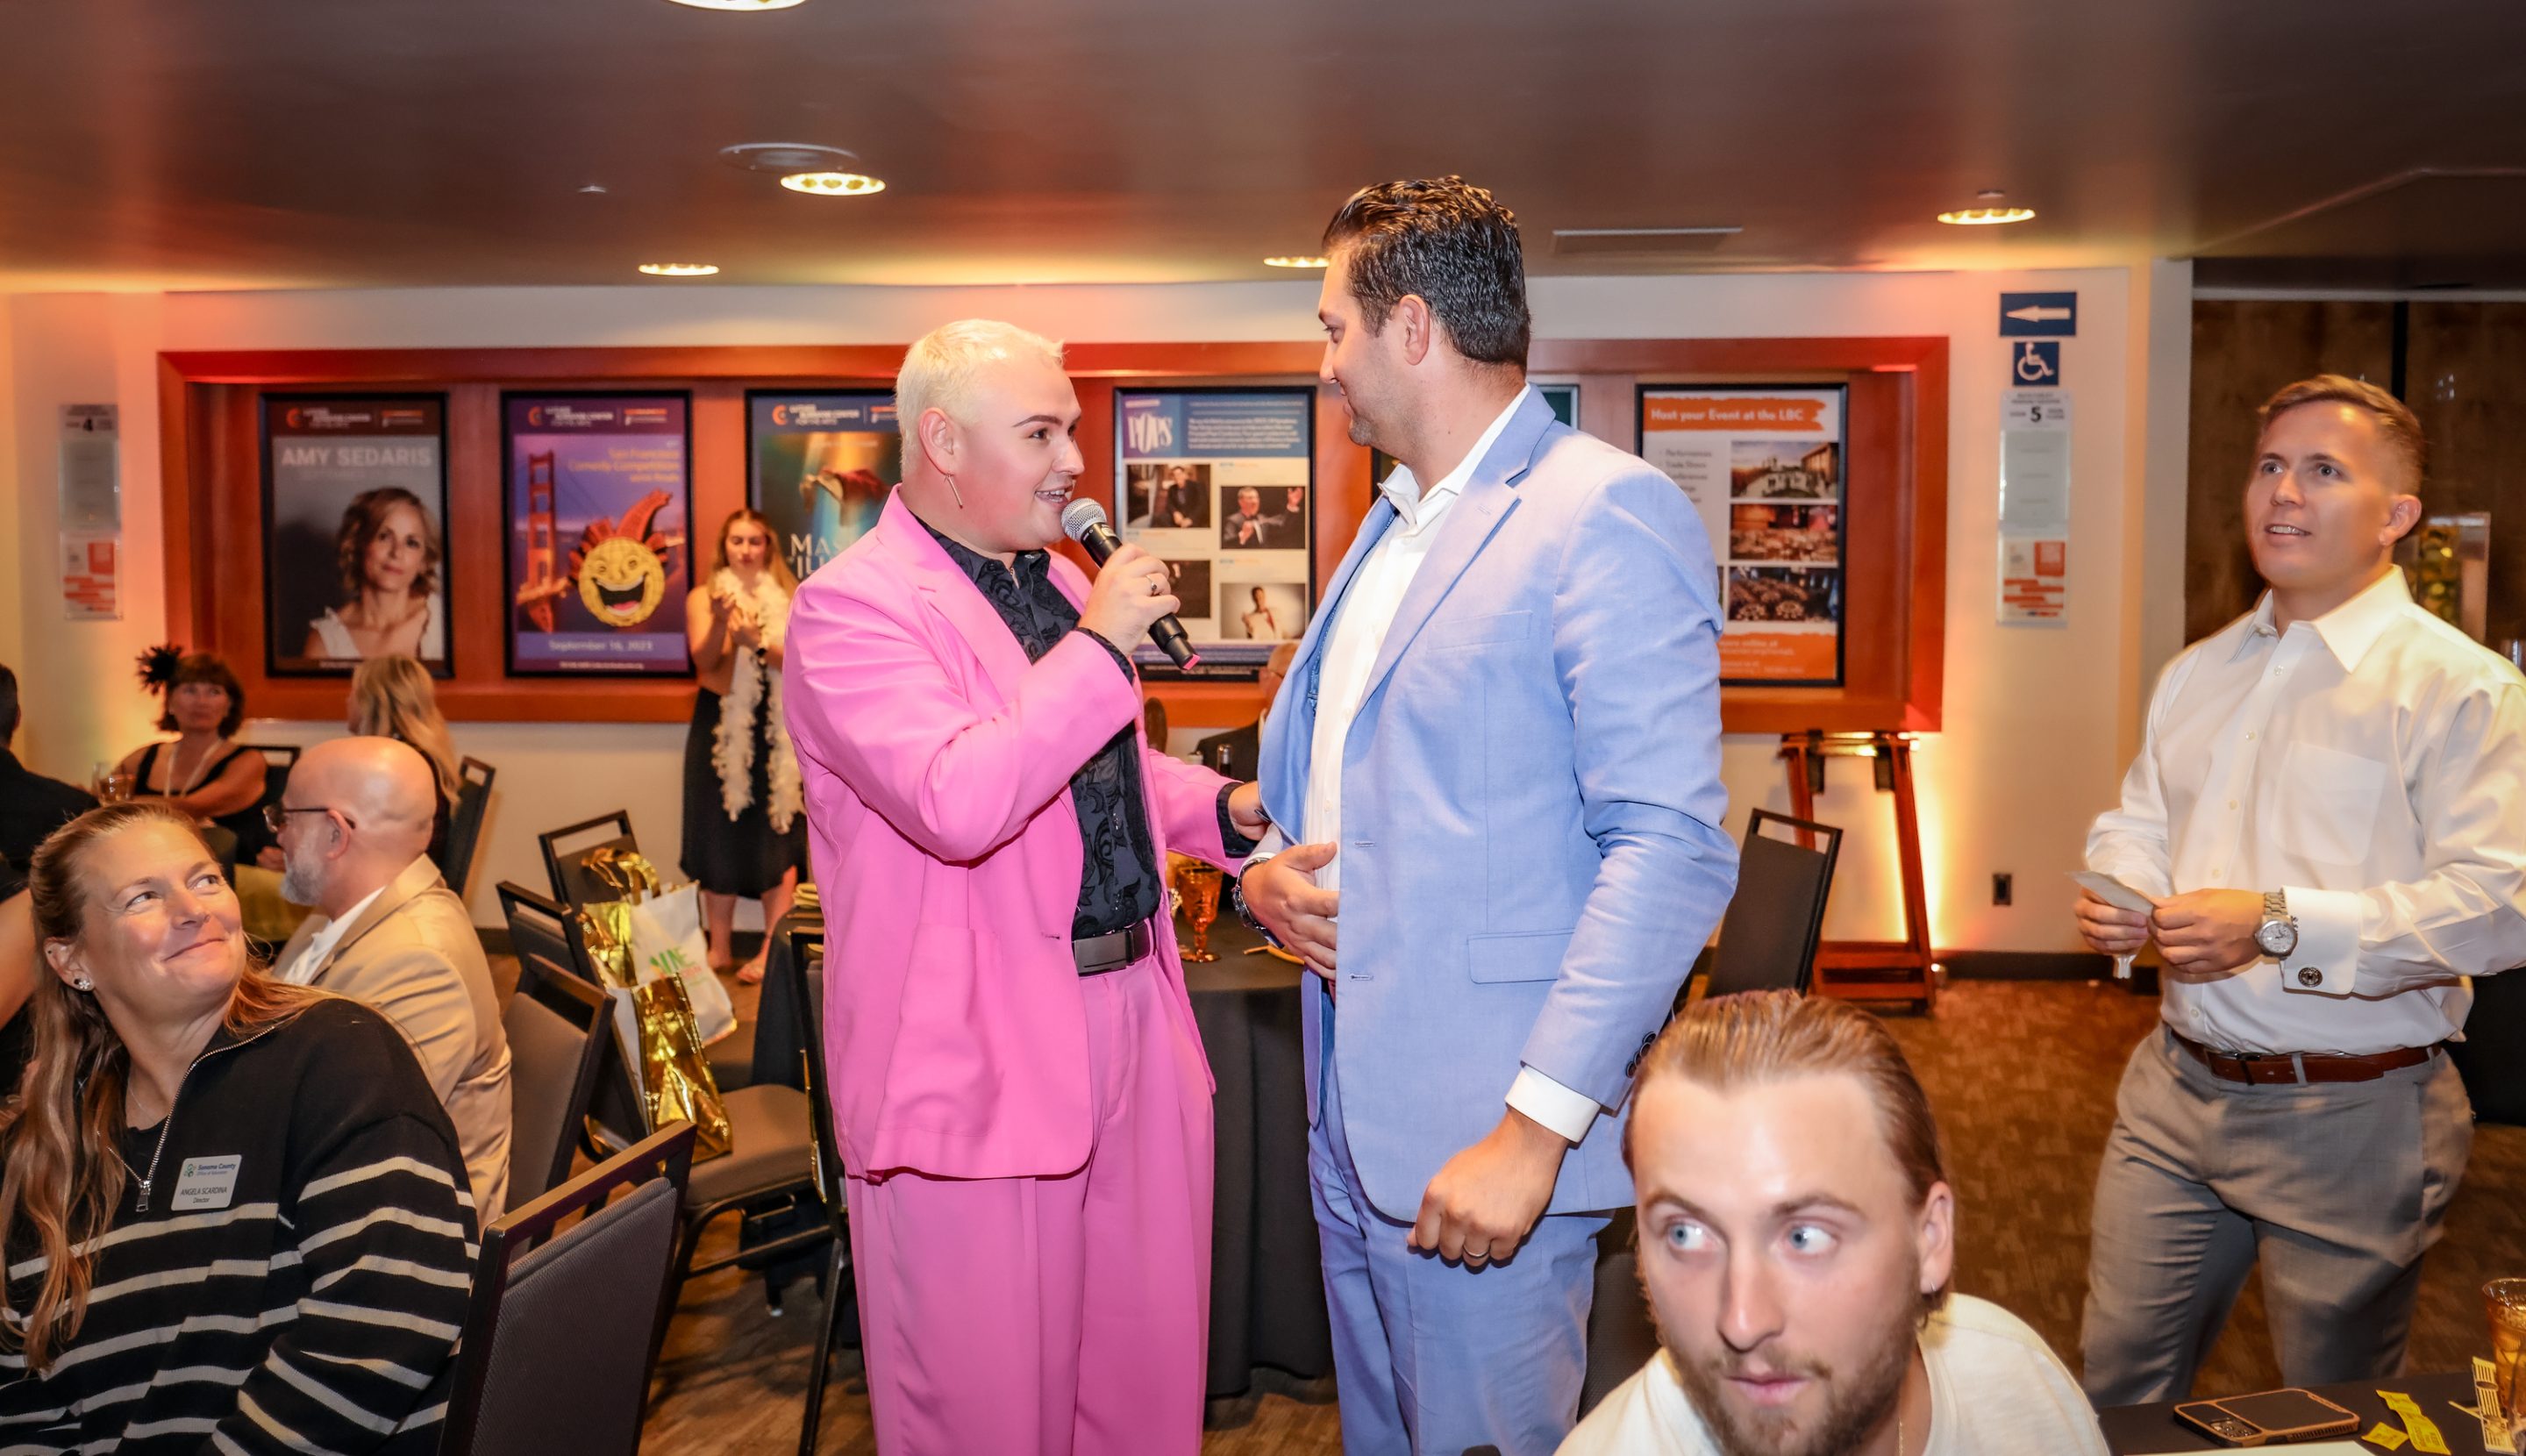 At a party, a man in a pink suit is chatting with another man from a Sonoma County Non-Profit organization.